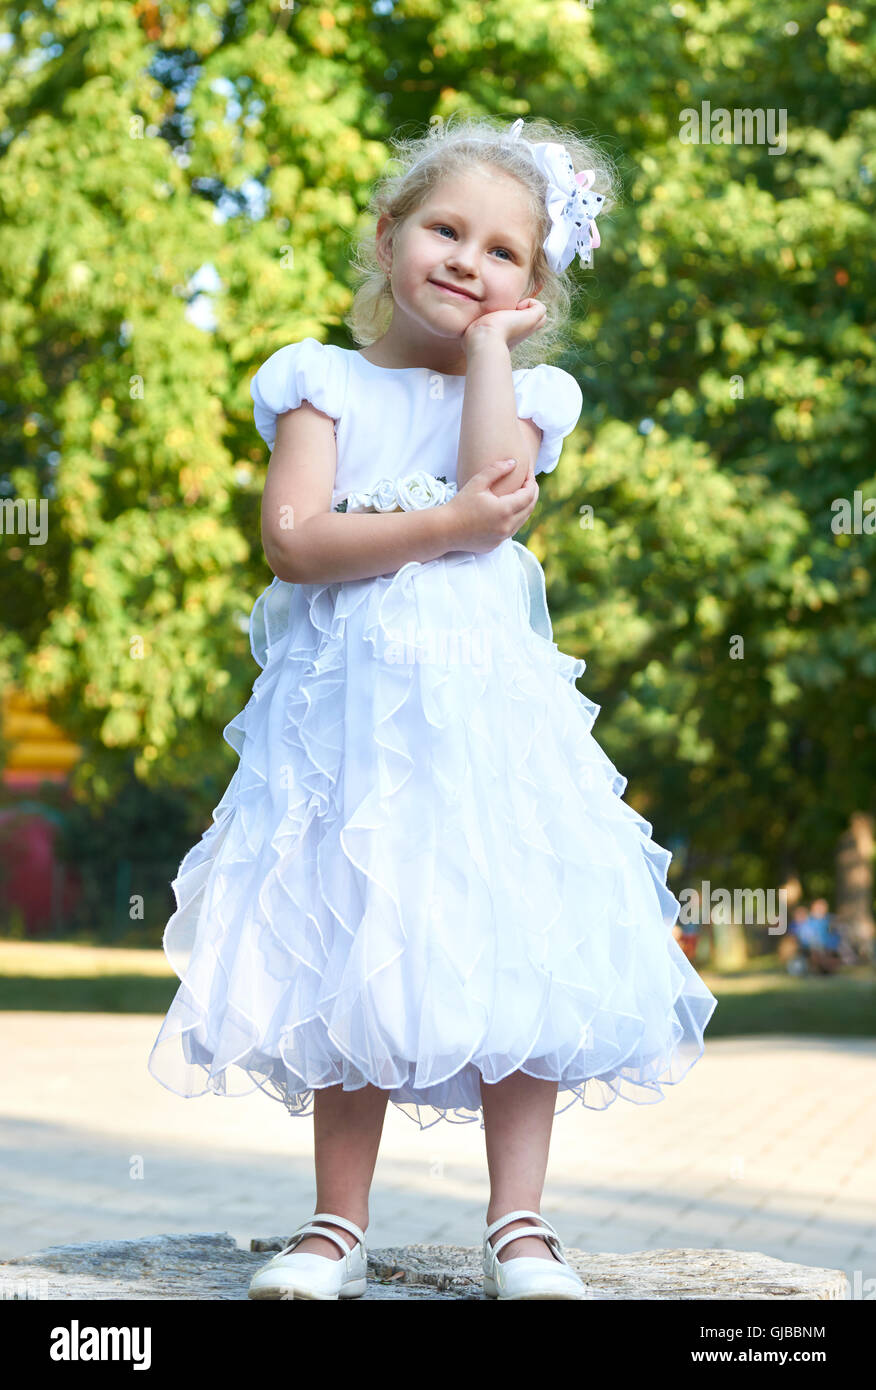 child girl in white gown, happy childhood concept, summer season in city park Stock Photo